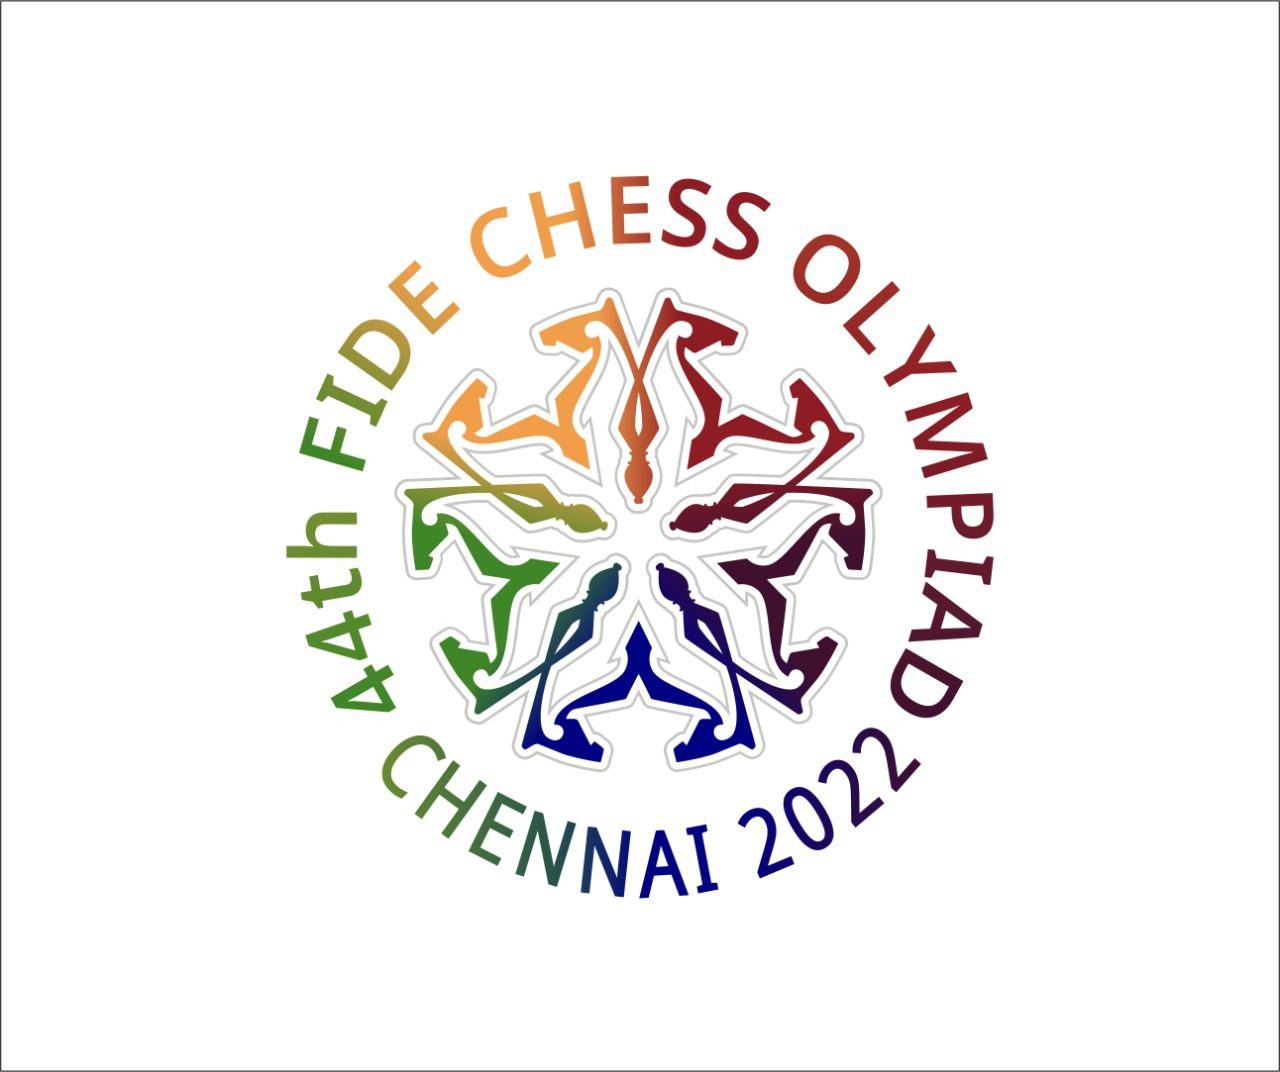 India to host 44th edition of Chess Olympiad 2022 in Chennai, Other Sports  News